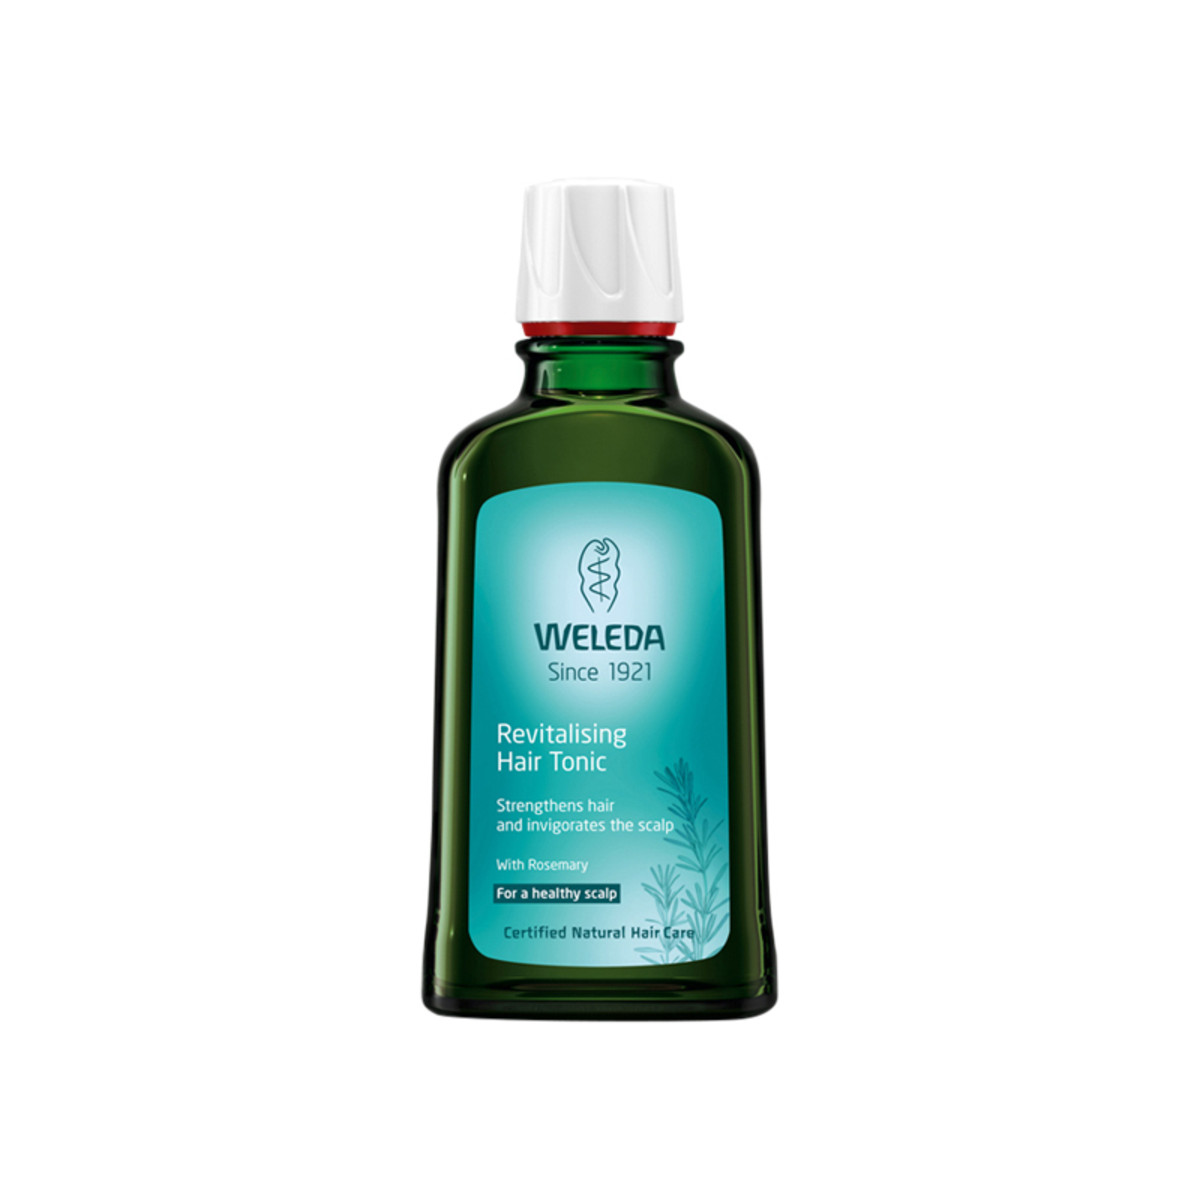 WELEDA - Revitalising Hair Tonic with Rosemary (For A Healthy Scalp)